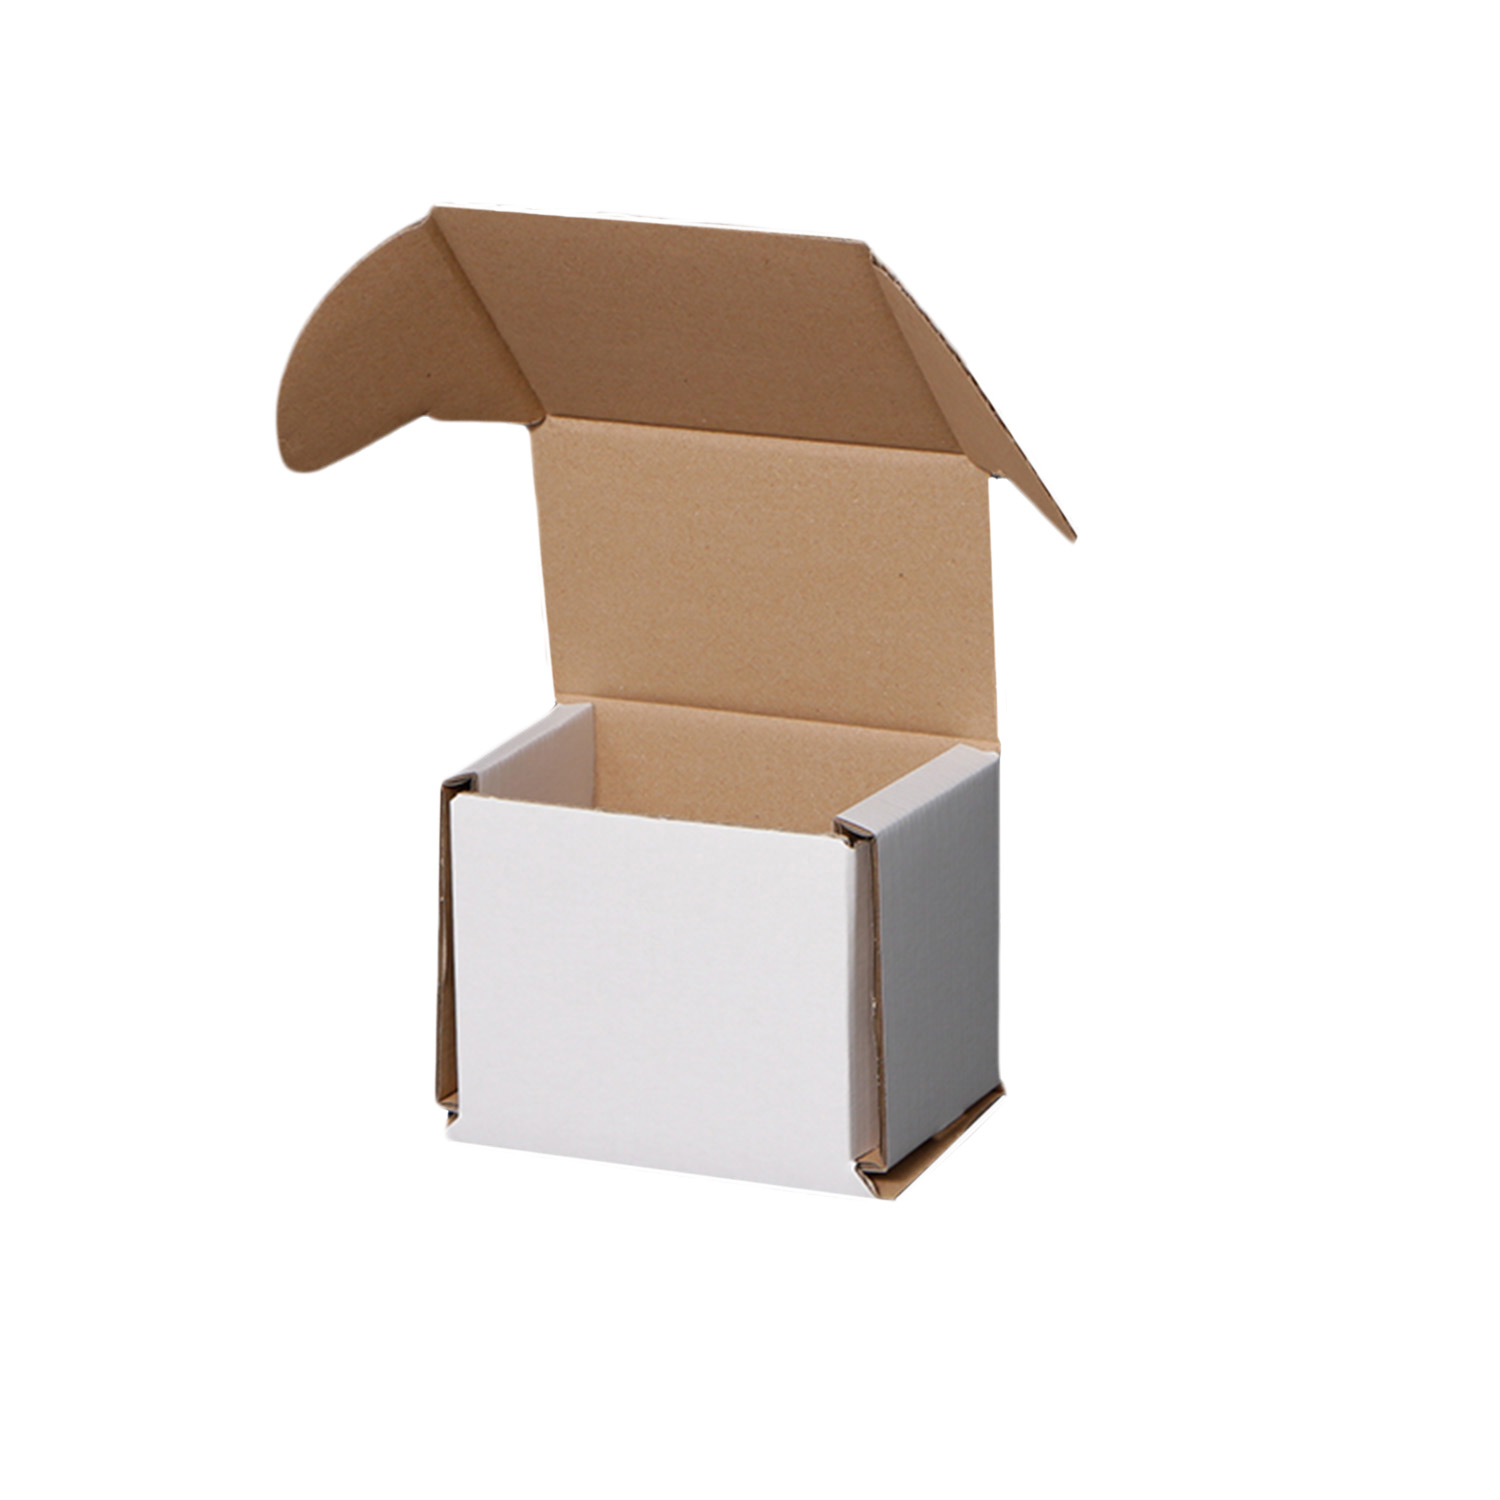 Small postal boxes  eco friendly cardboard boxes